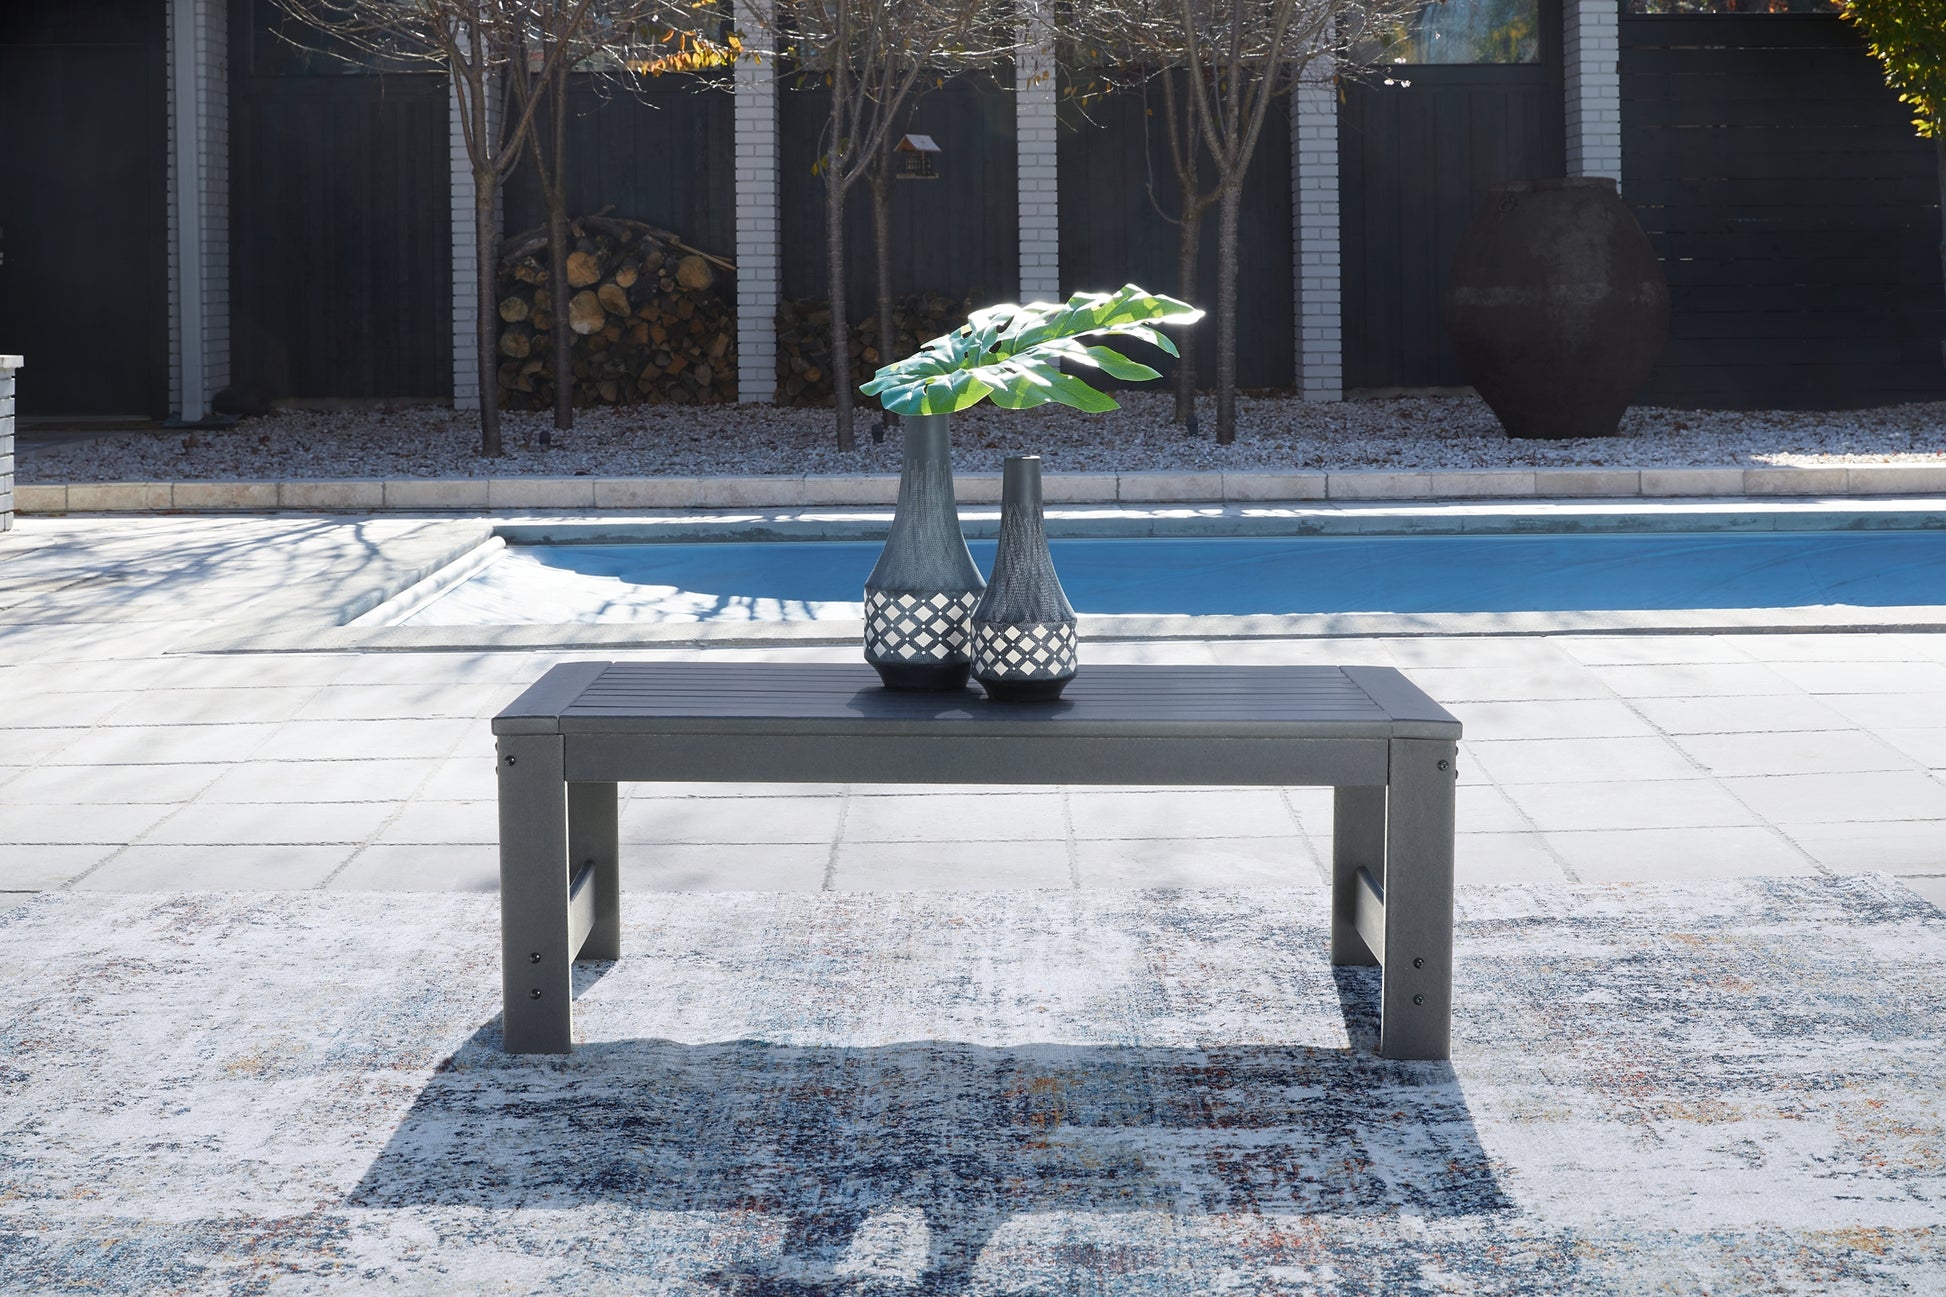 Amora Outdoor Coffee Table with 2 End Tables JB's Furniture  Home Furniture, Home Decor, Furniture Store